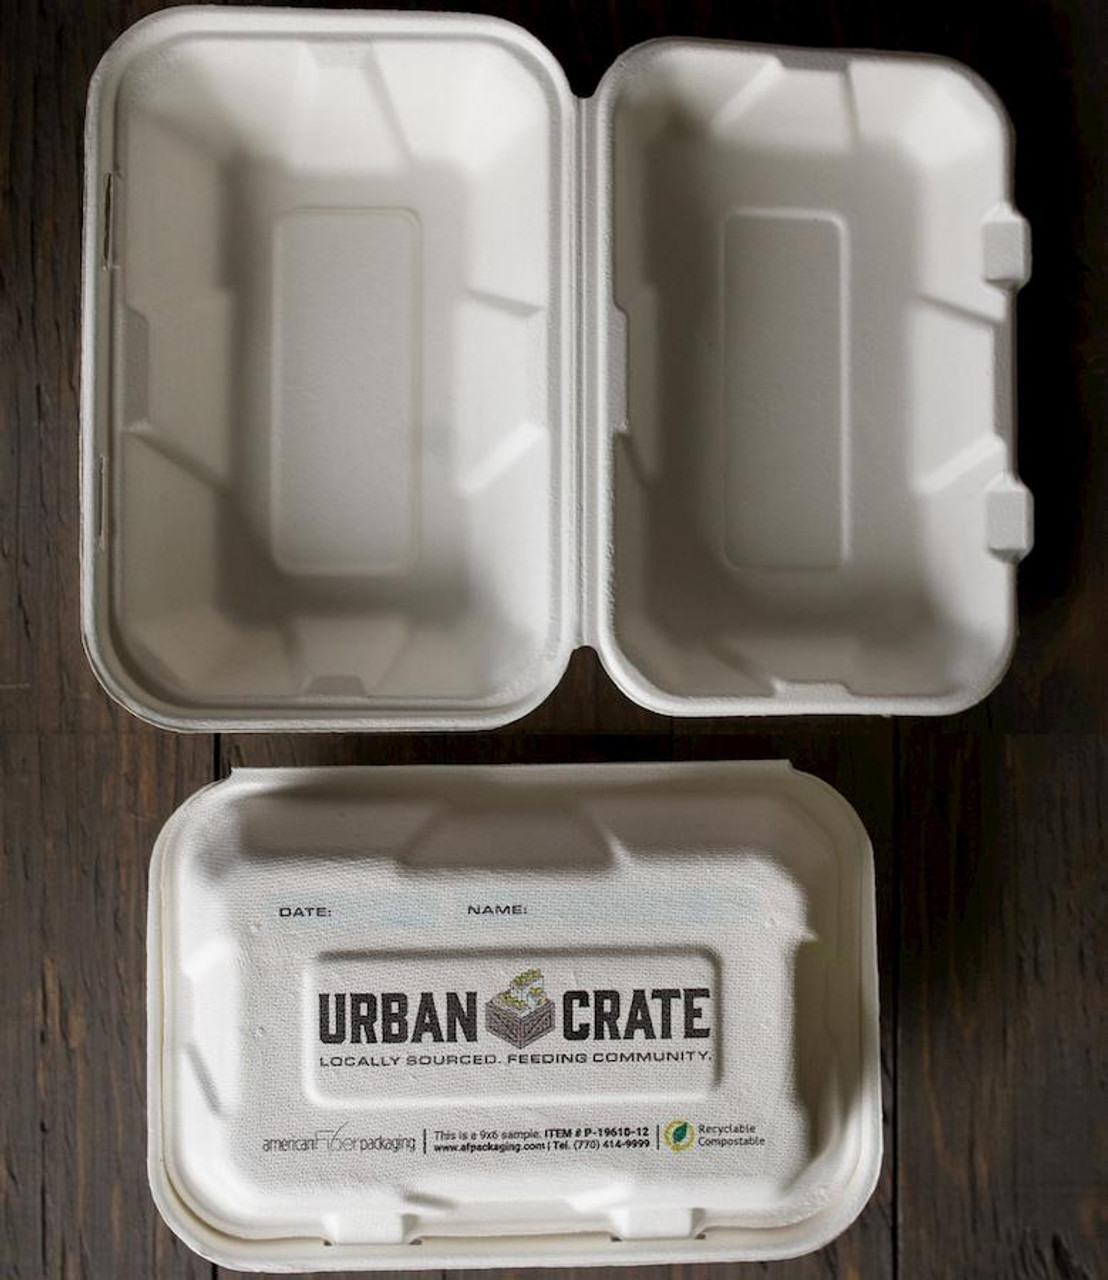 Custom Printed Take Out Boxes - Printed To Go Boxes